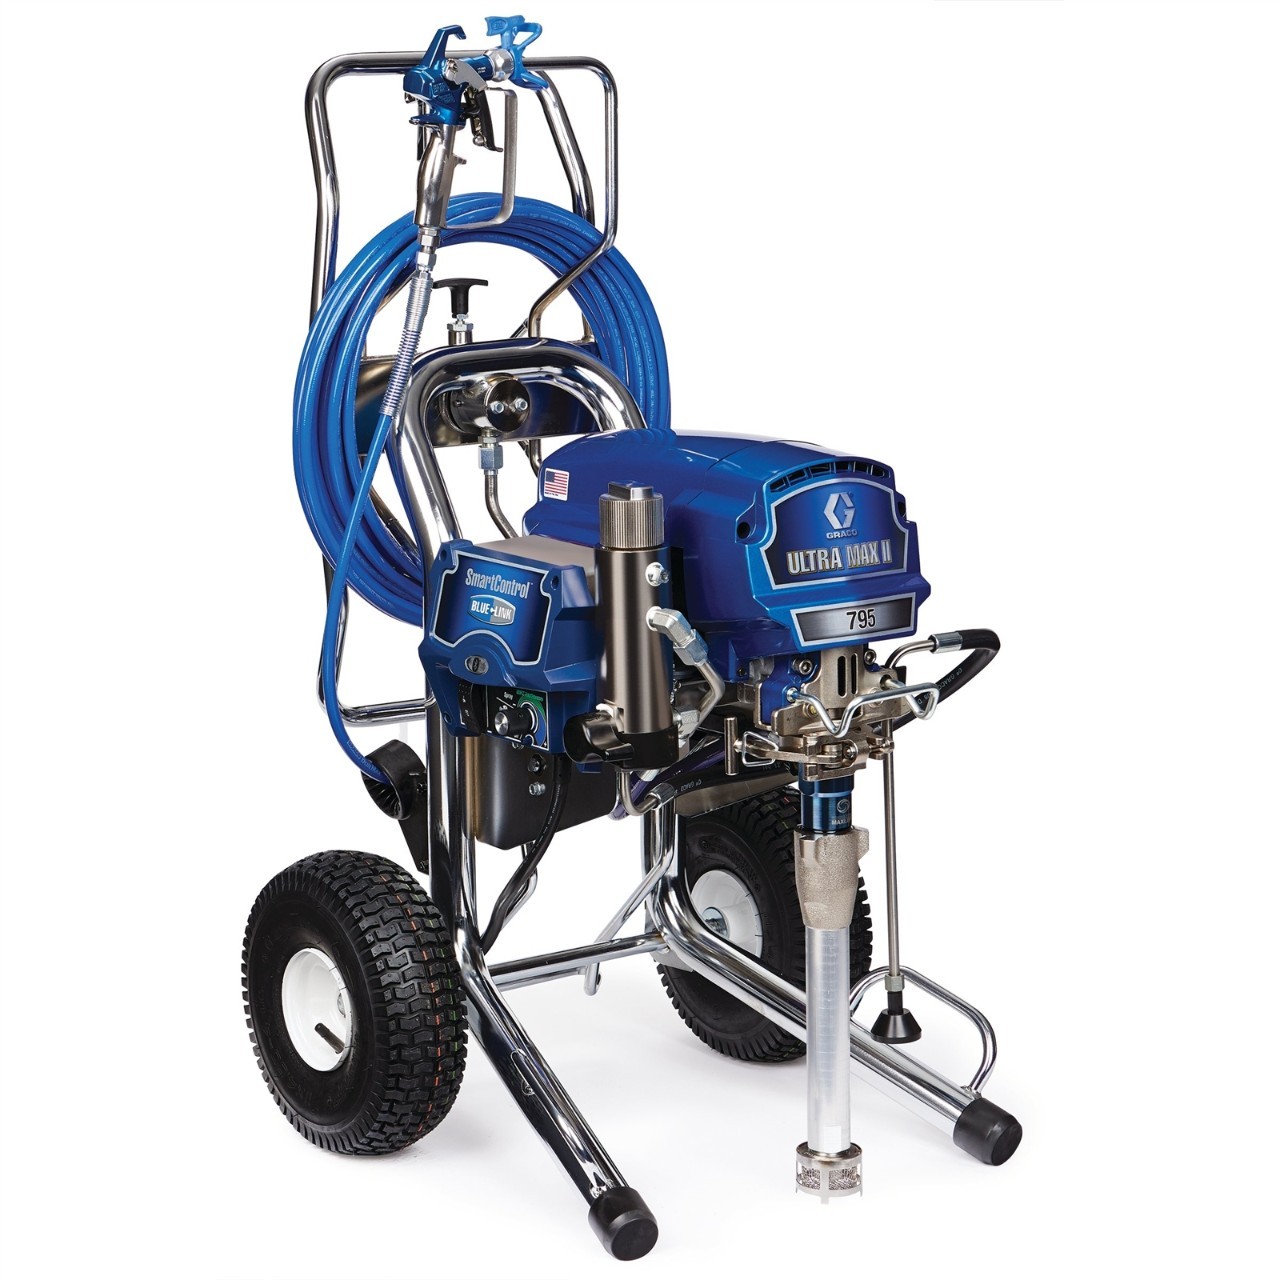 Graco Ultra Max II 795 ProContractor Series Electric Airless Sprayer Parts